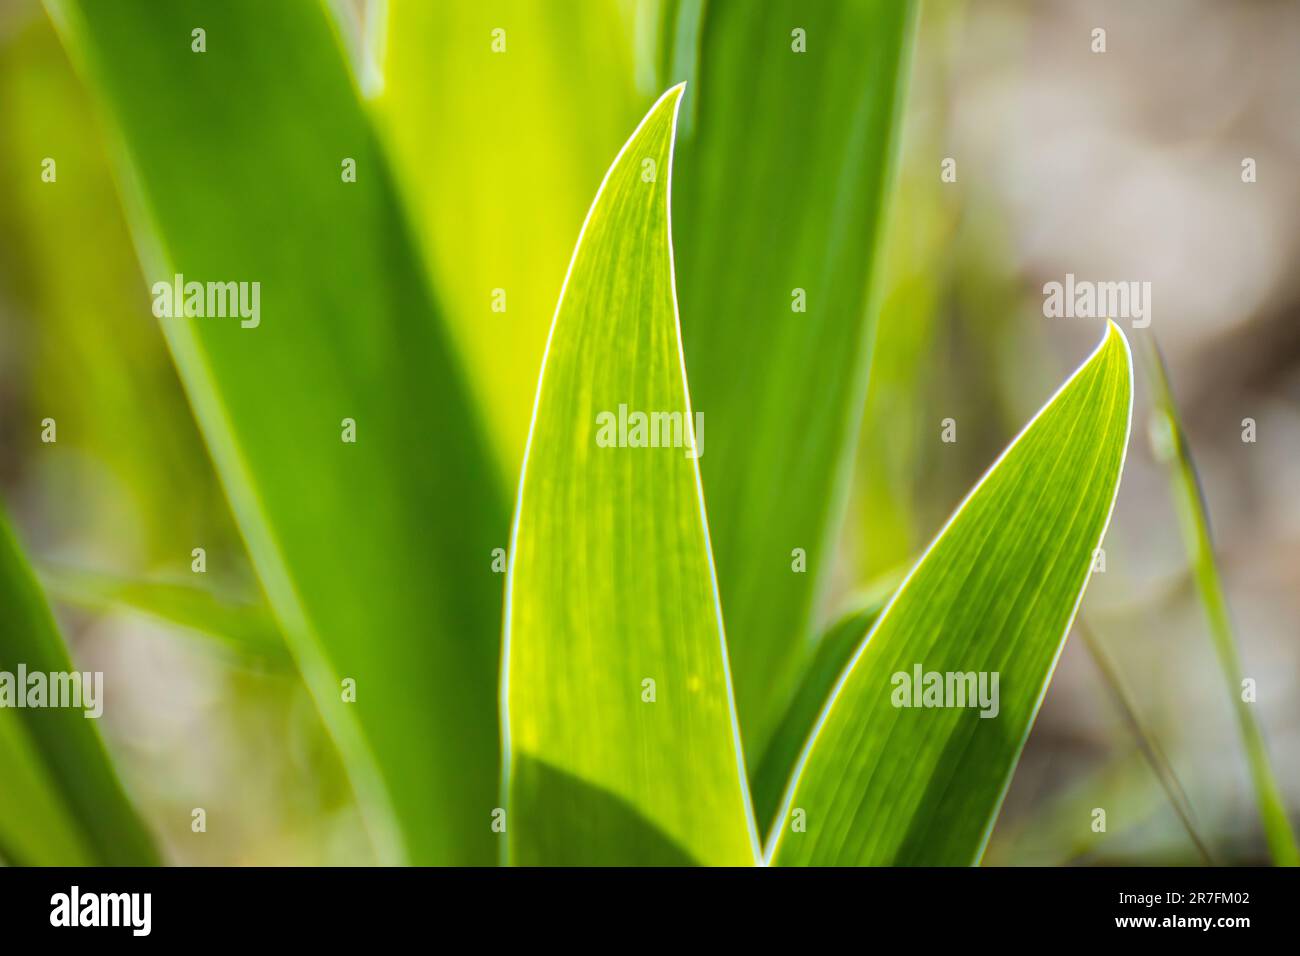 Green shining grass leaves in garden with blurry background. Spring sunny development growth Stock Photo